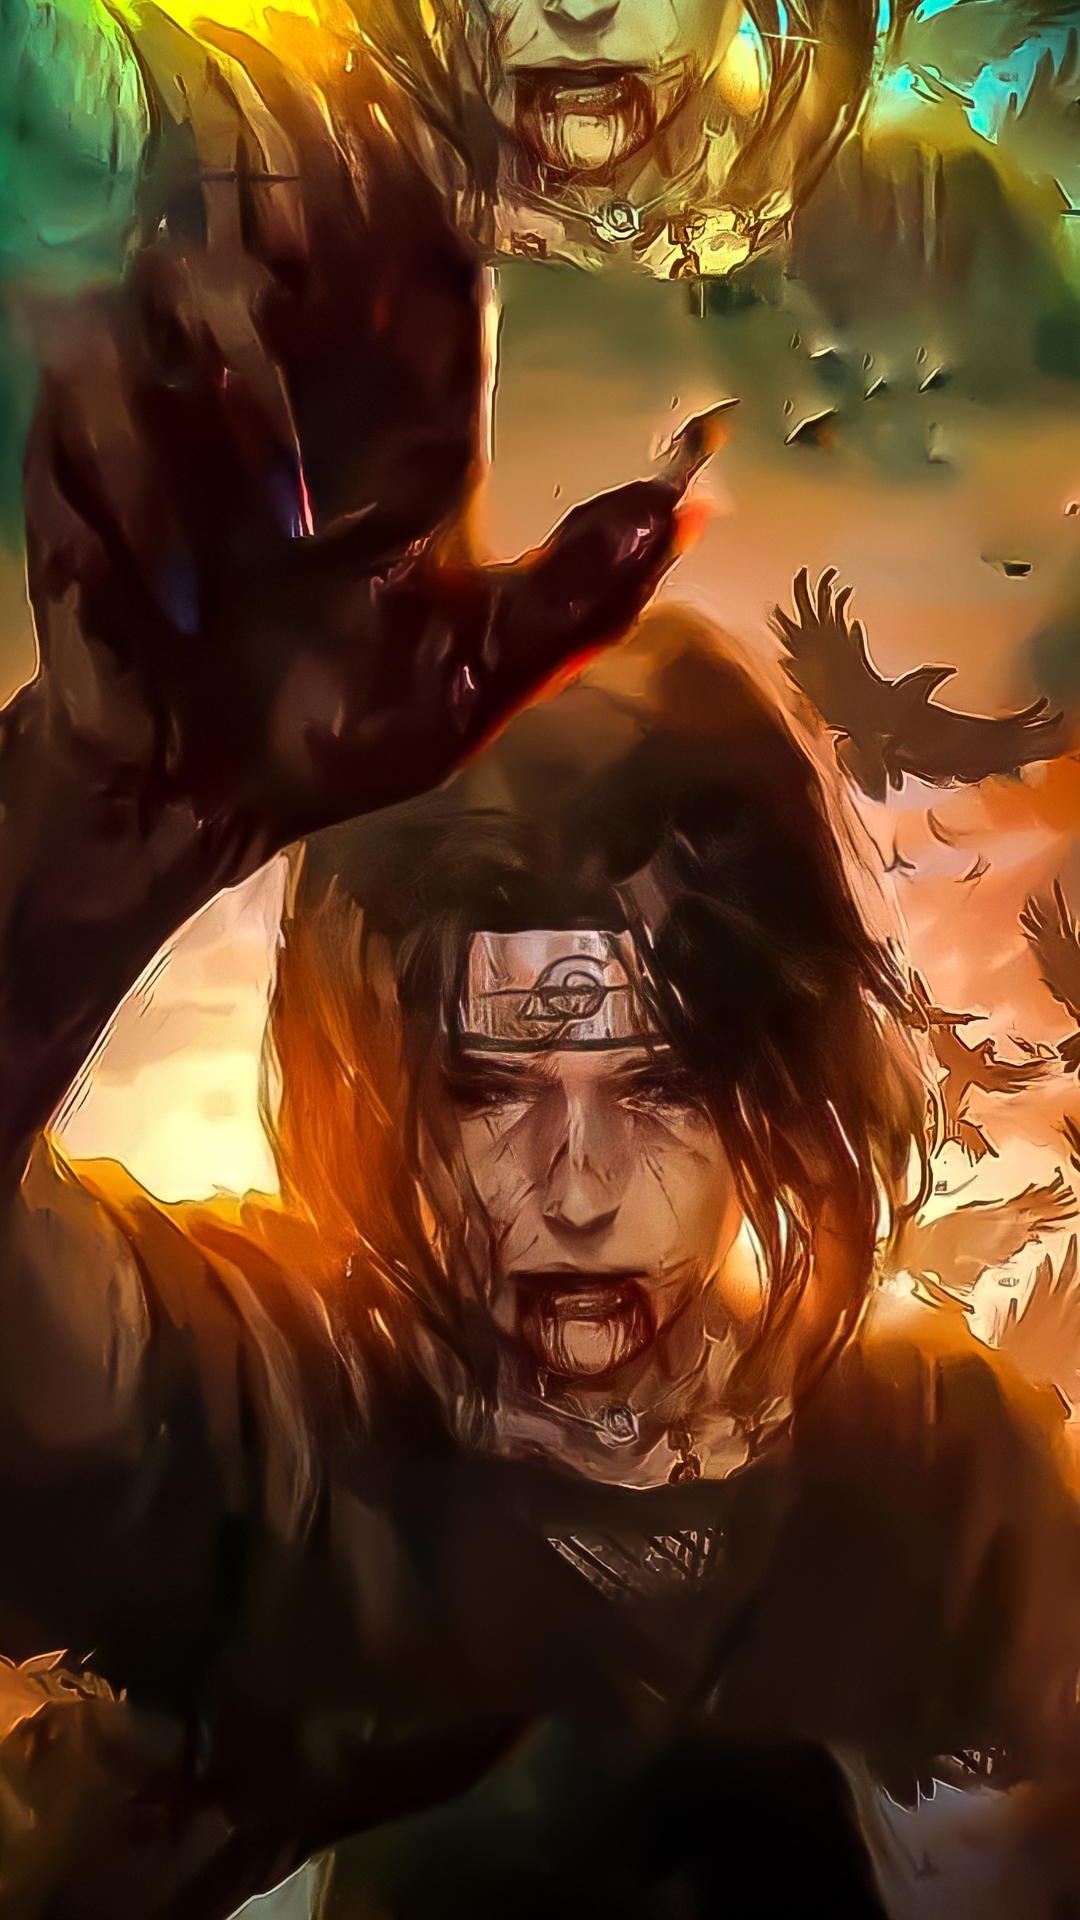 Download Obito Uchiha wallpapers for mobile phone, free Obito